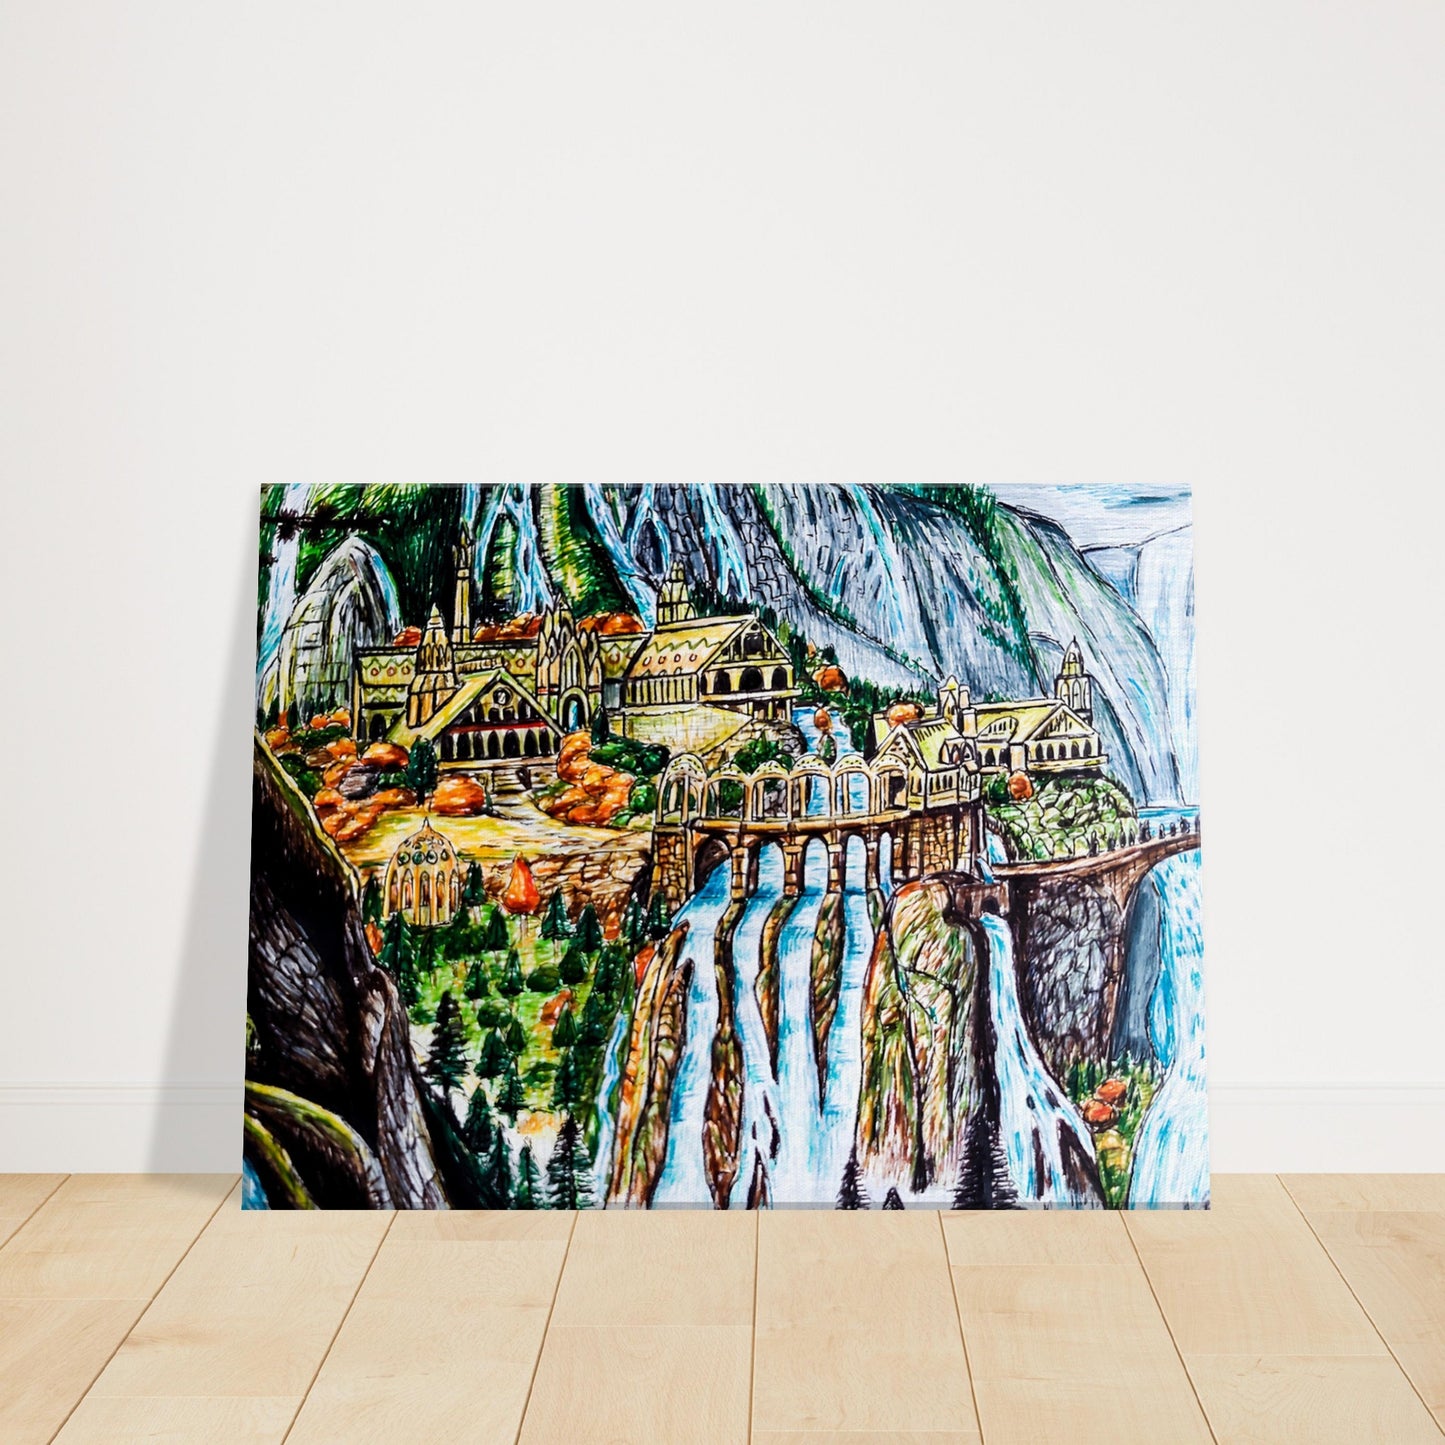 Rivendell, Lord Of The Rings Canvas Art print